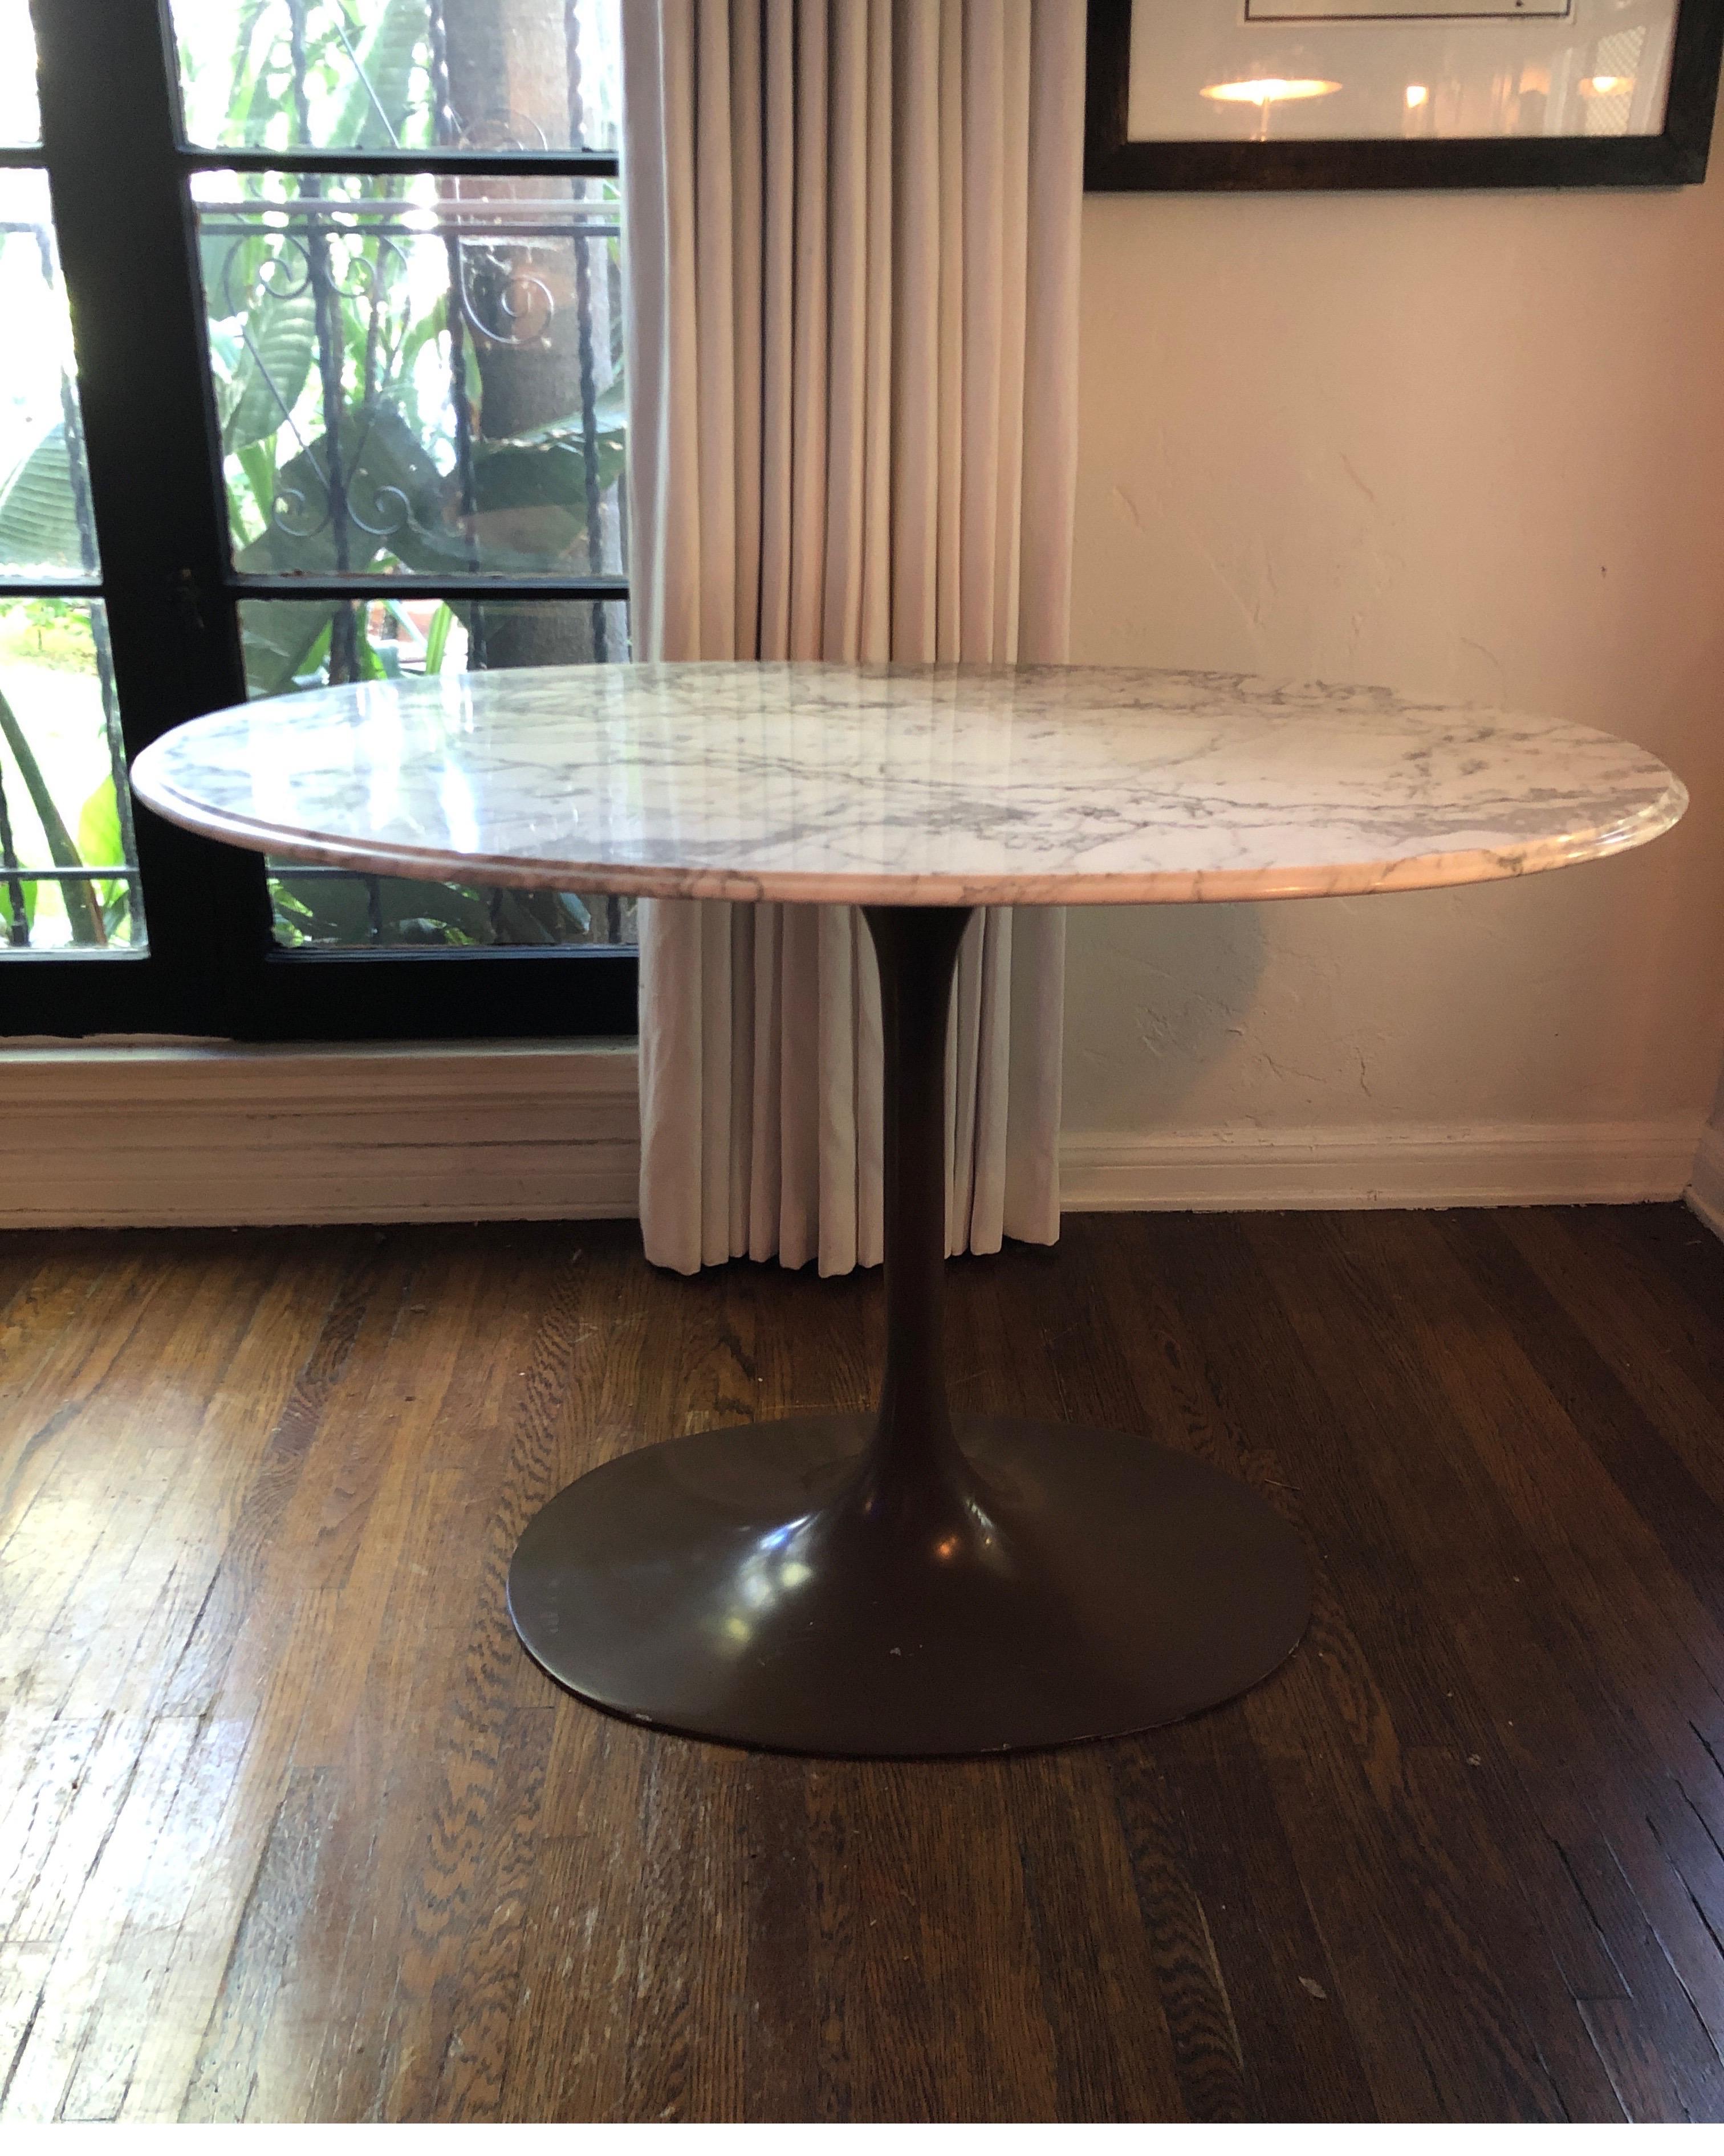 Mid-Century Modern vintage oval tulip table with Italian marble top.
Metal base in brown/bronze color.
Knoll Eero Saarinen Knoll style.

Top is white/black Carrara marble measuring: 46 x 28 inches.